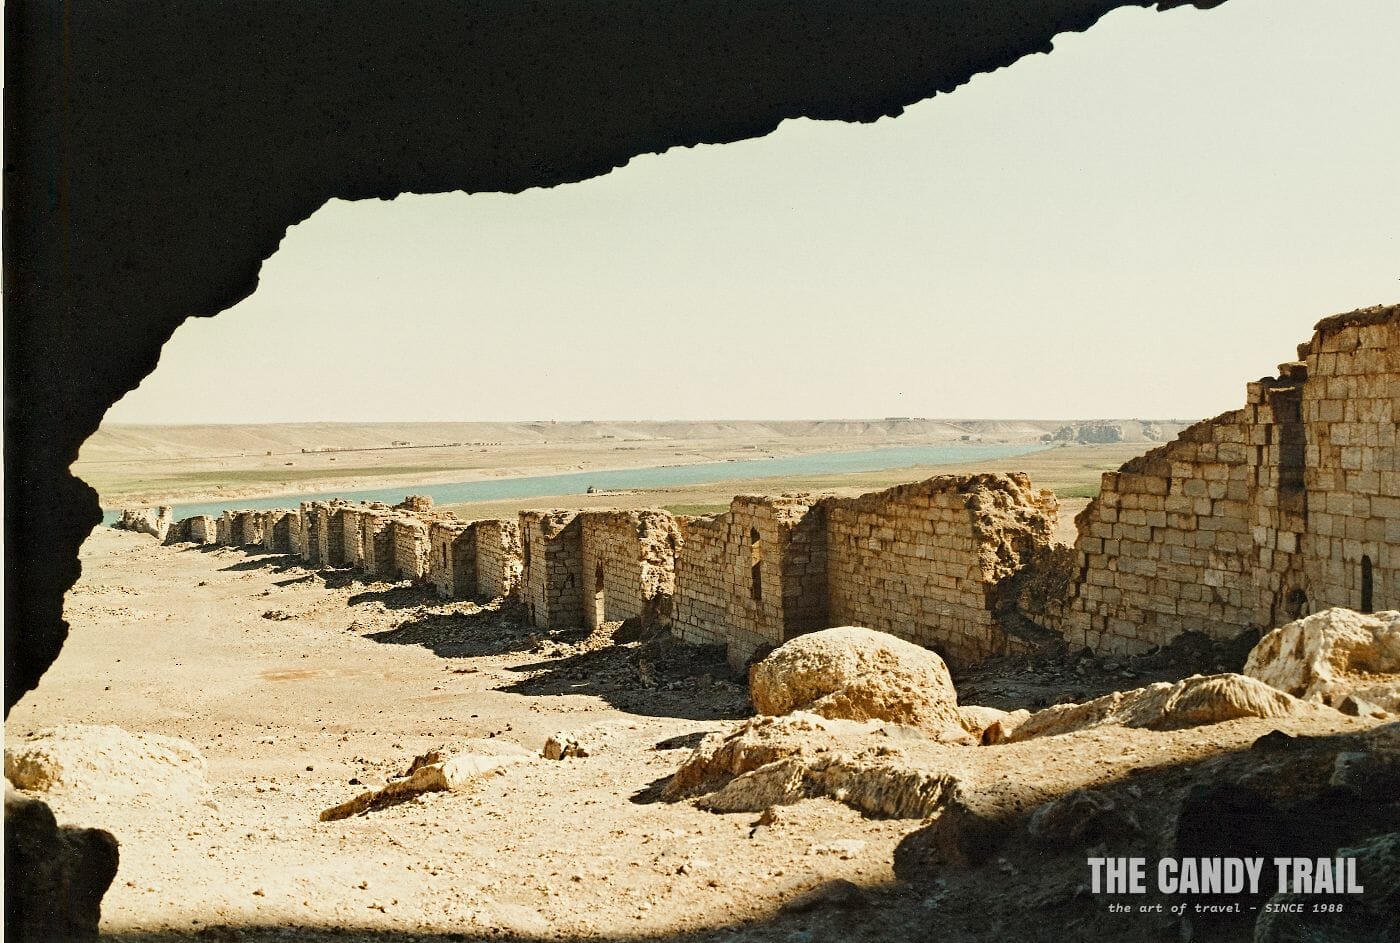 Long crumbling walls of Halabiye fortess on the Euphretes River in the deserts of Western Syria - 1989.